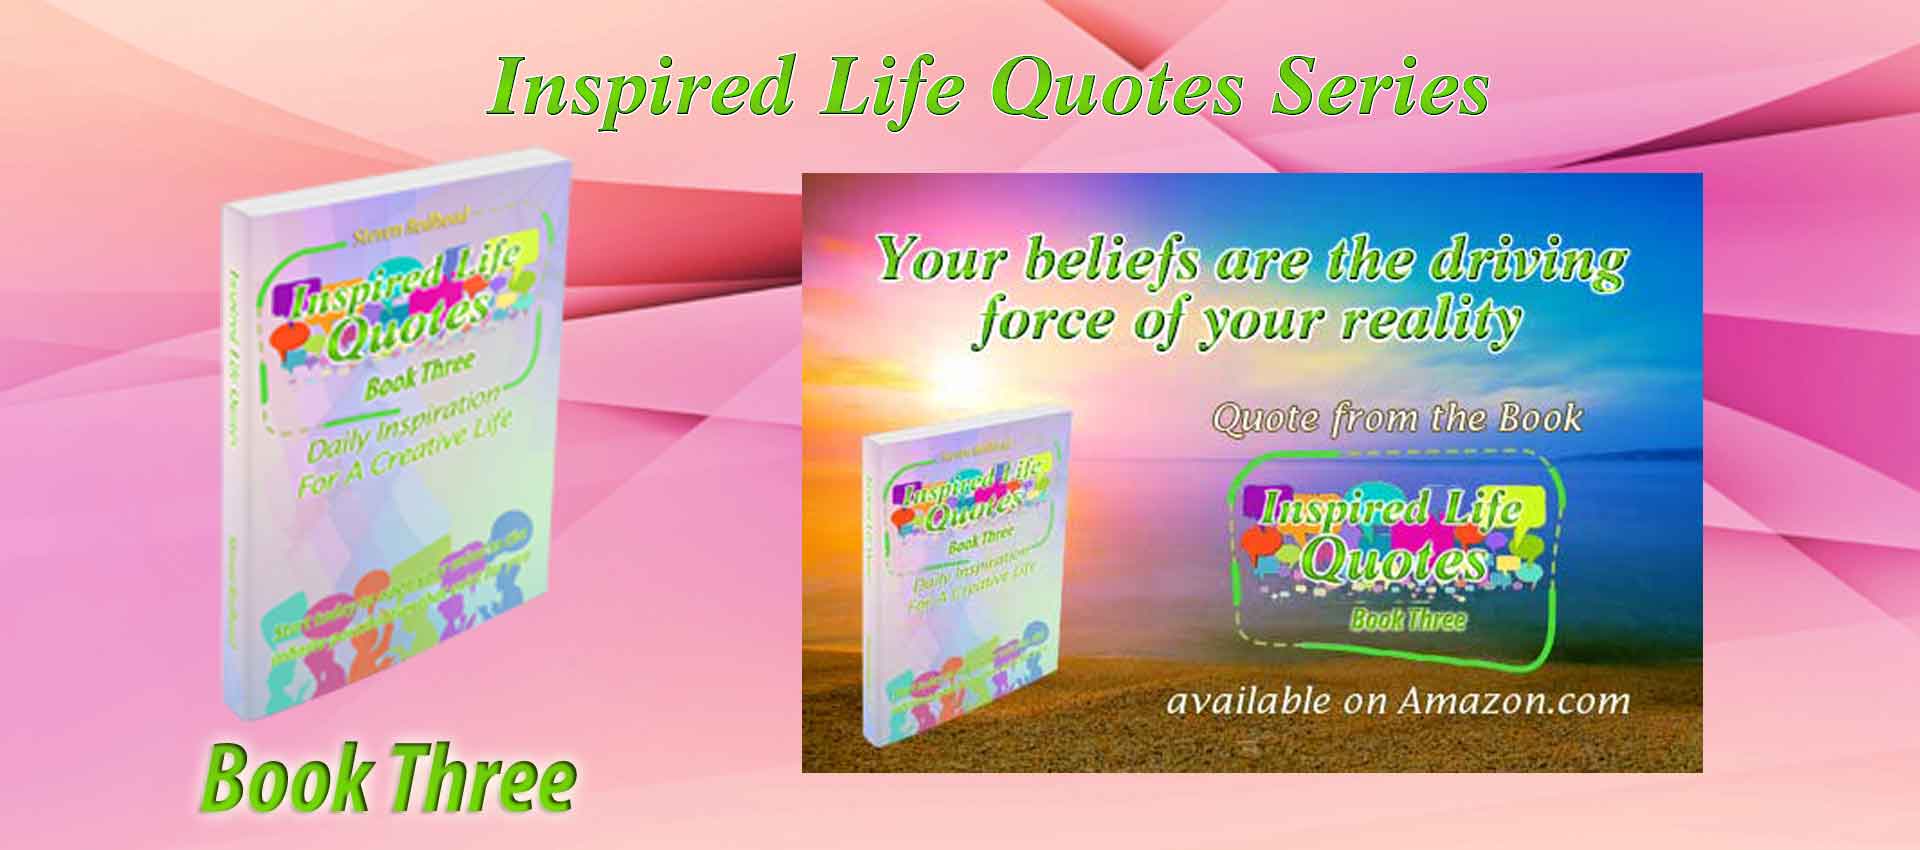 inspired life quotes book3 by steven redhead